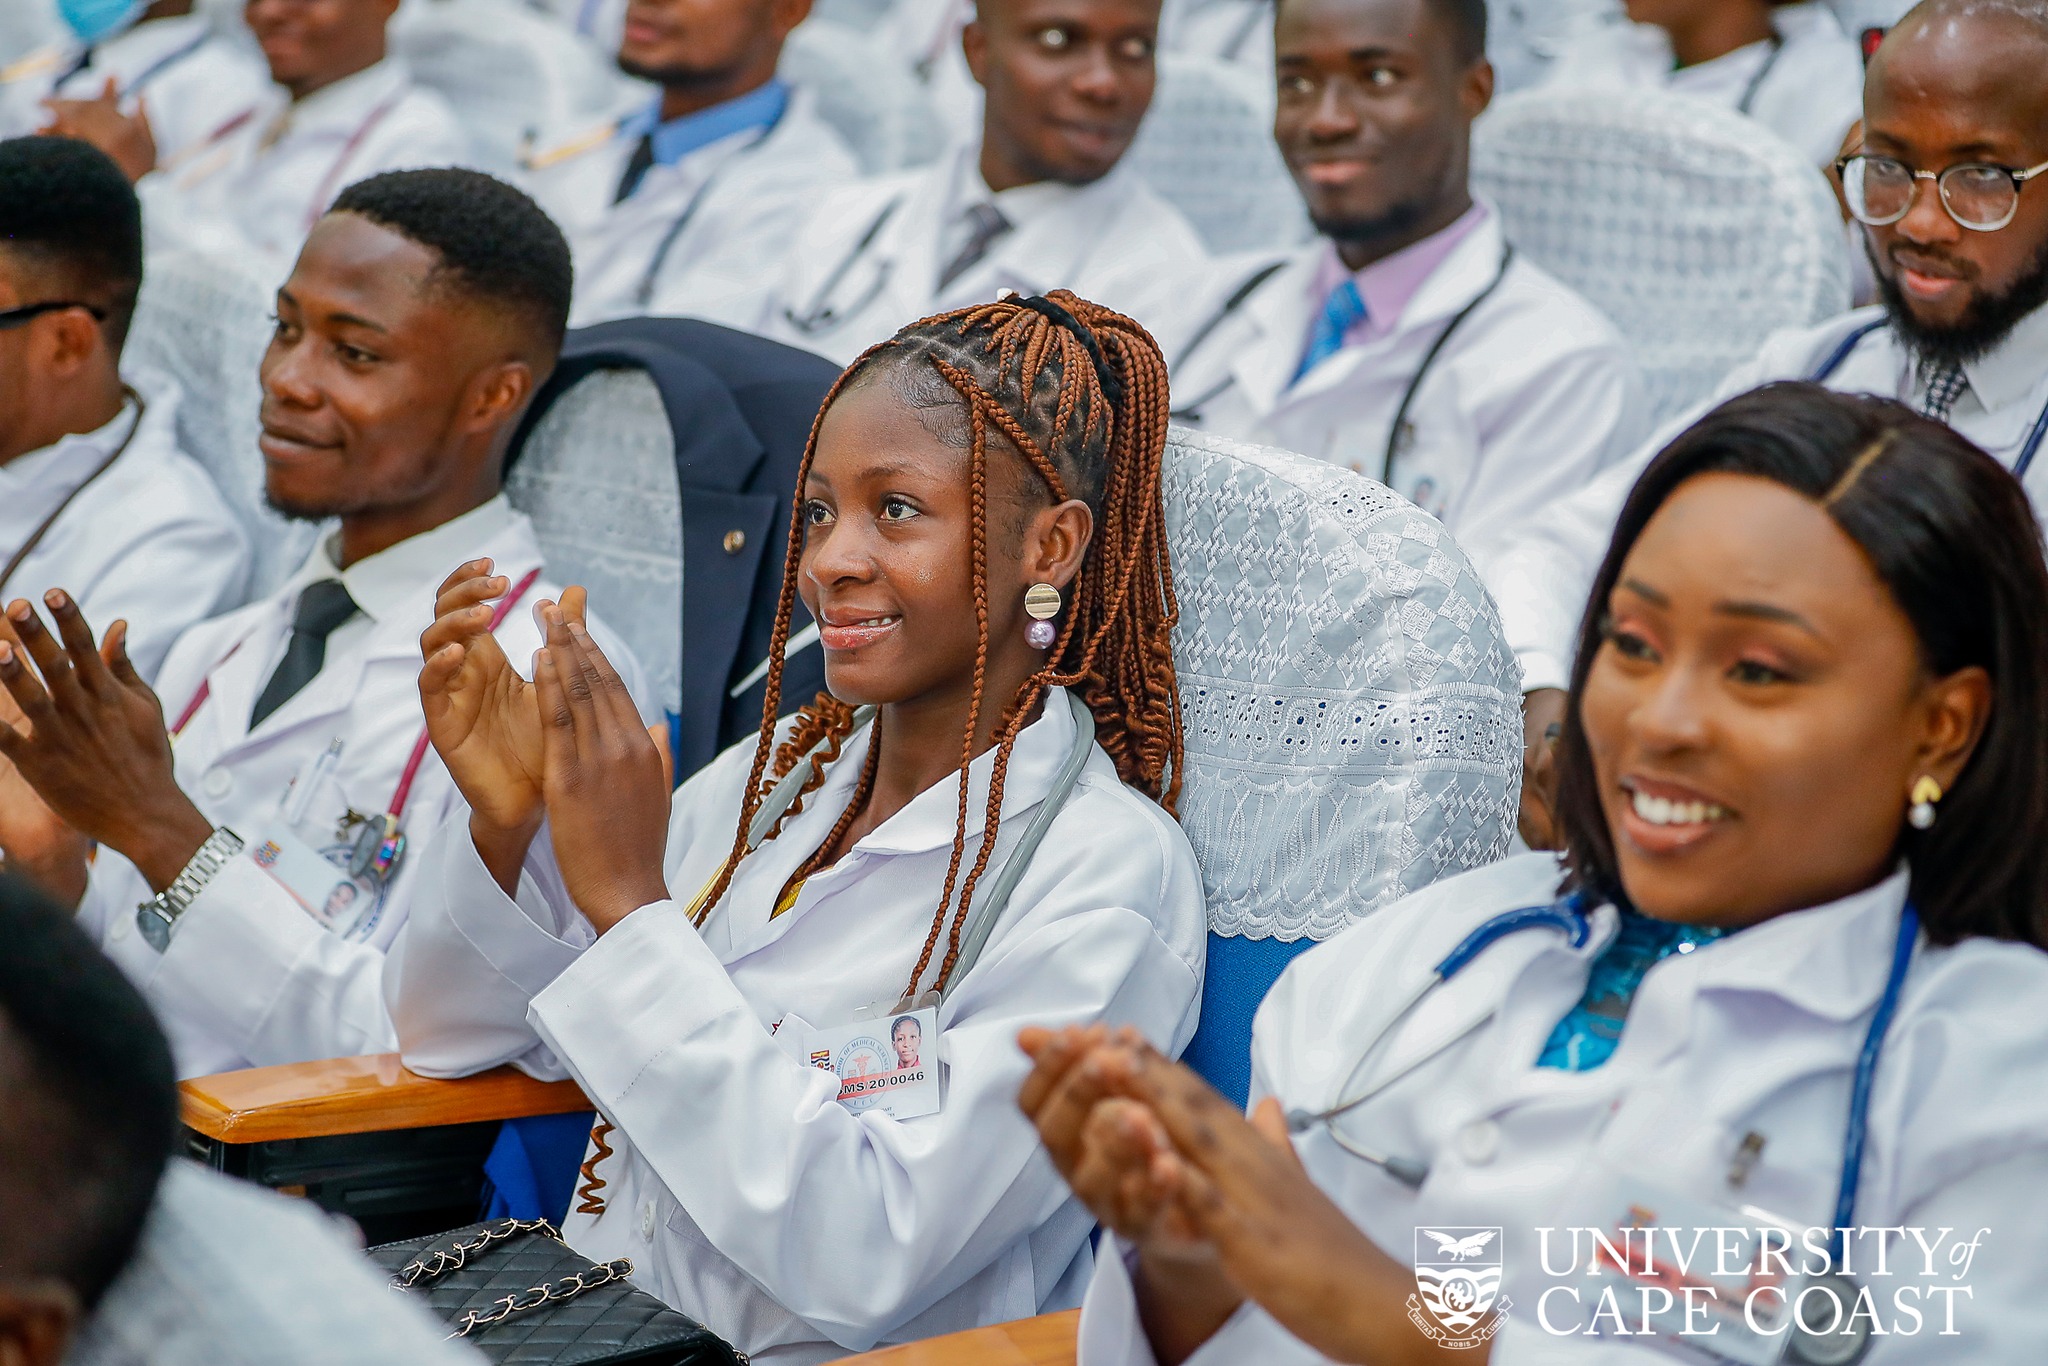 141 medical students gear up for clinical training